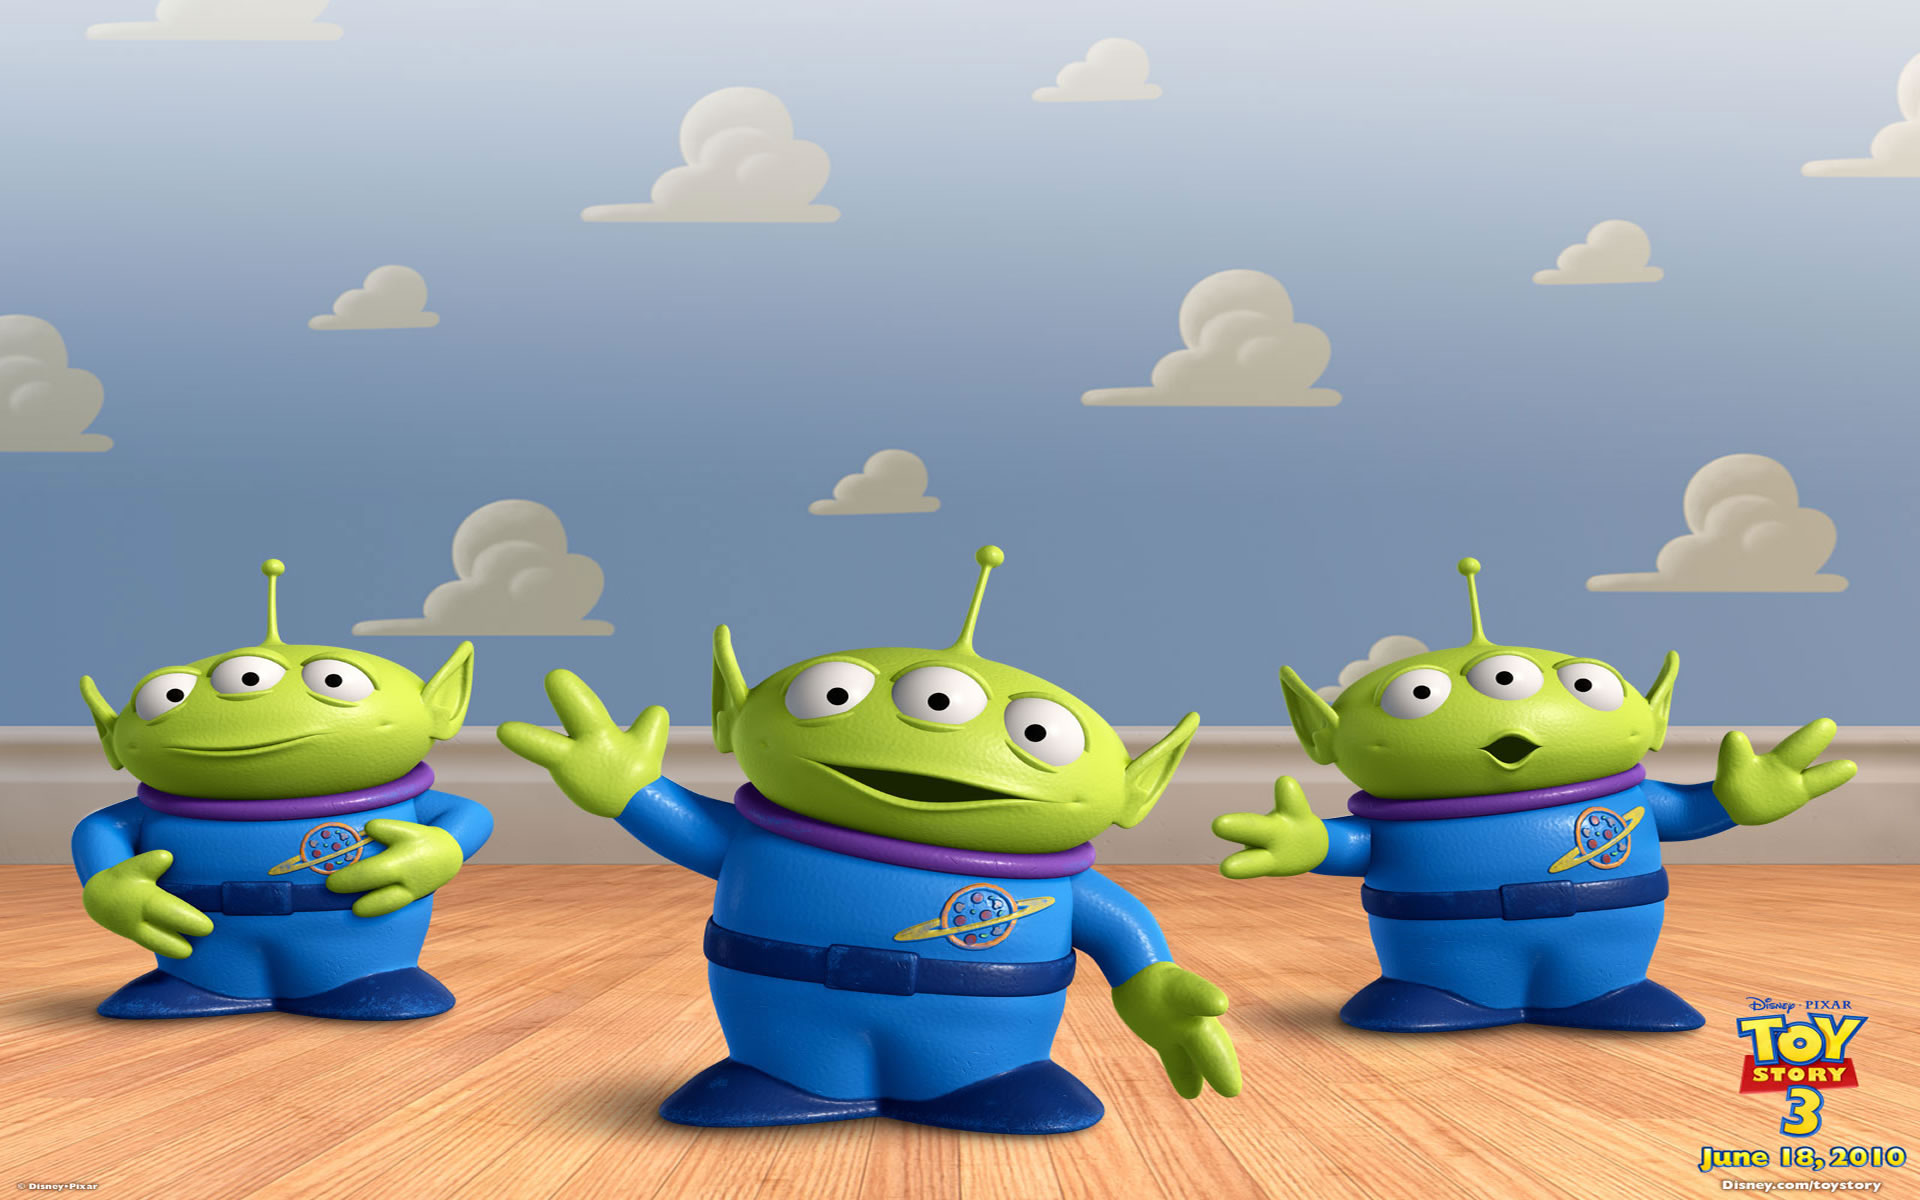 Toy Story 3 Wallpapers Trio de Marcianos   Wallpapers 1920x1200